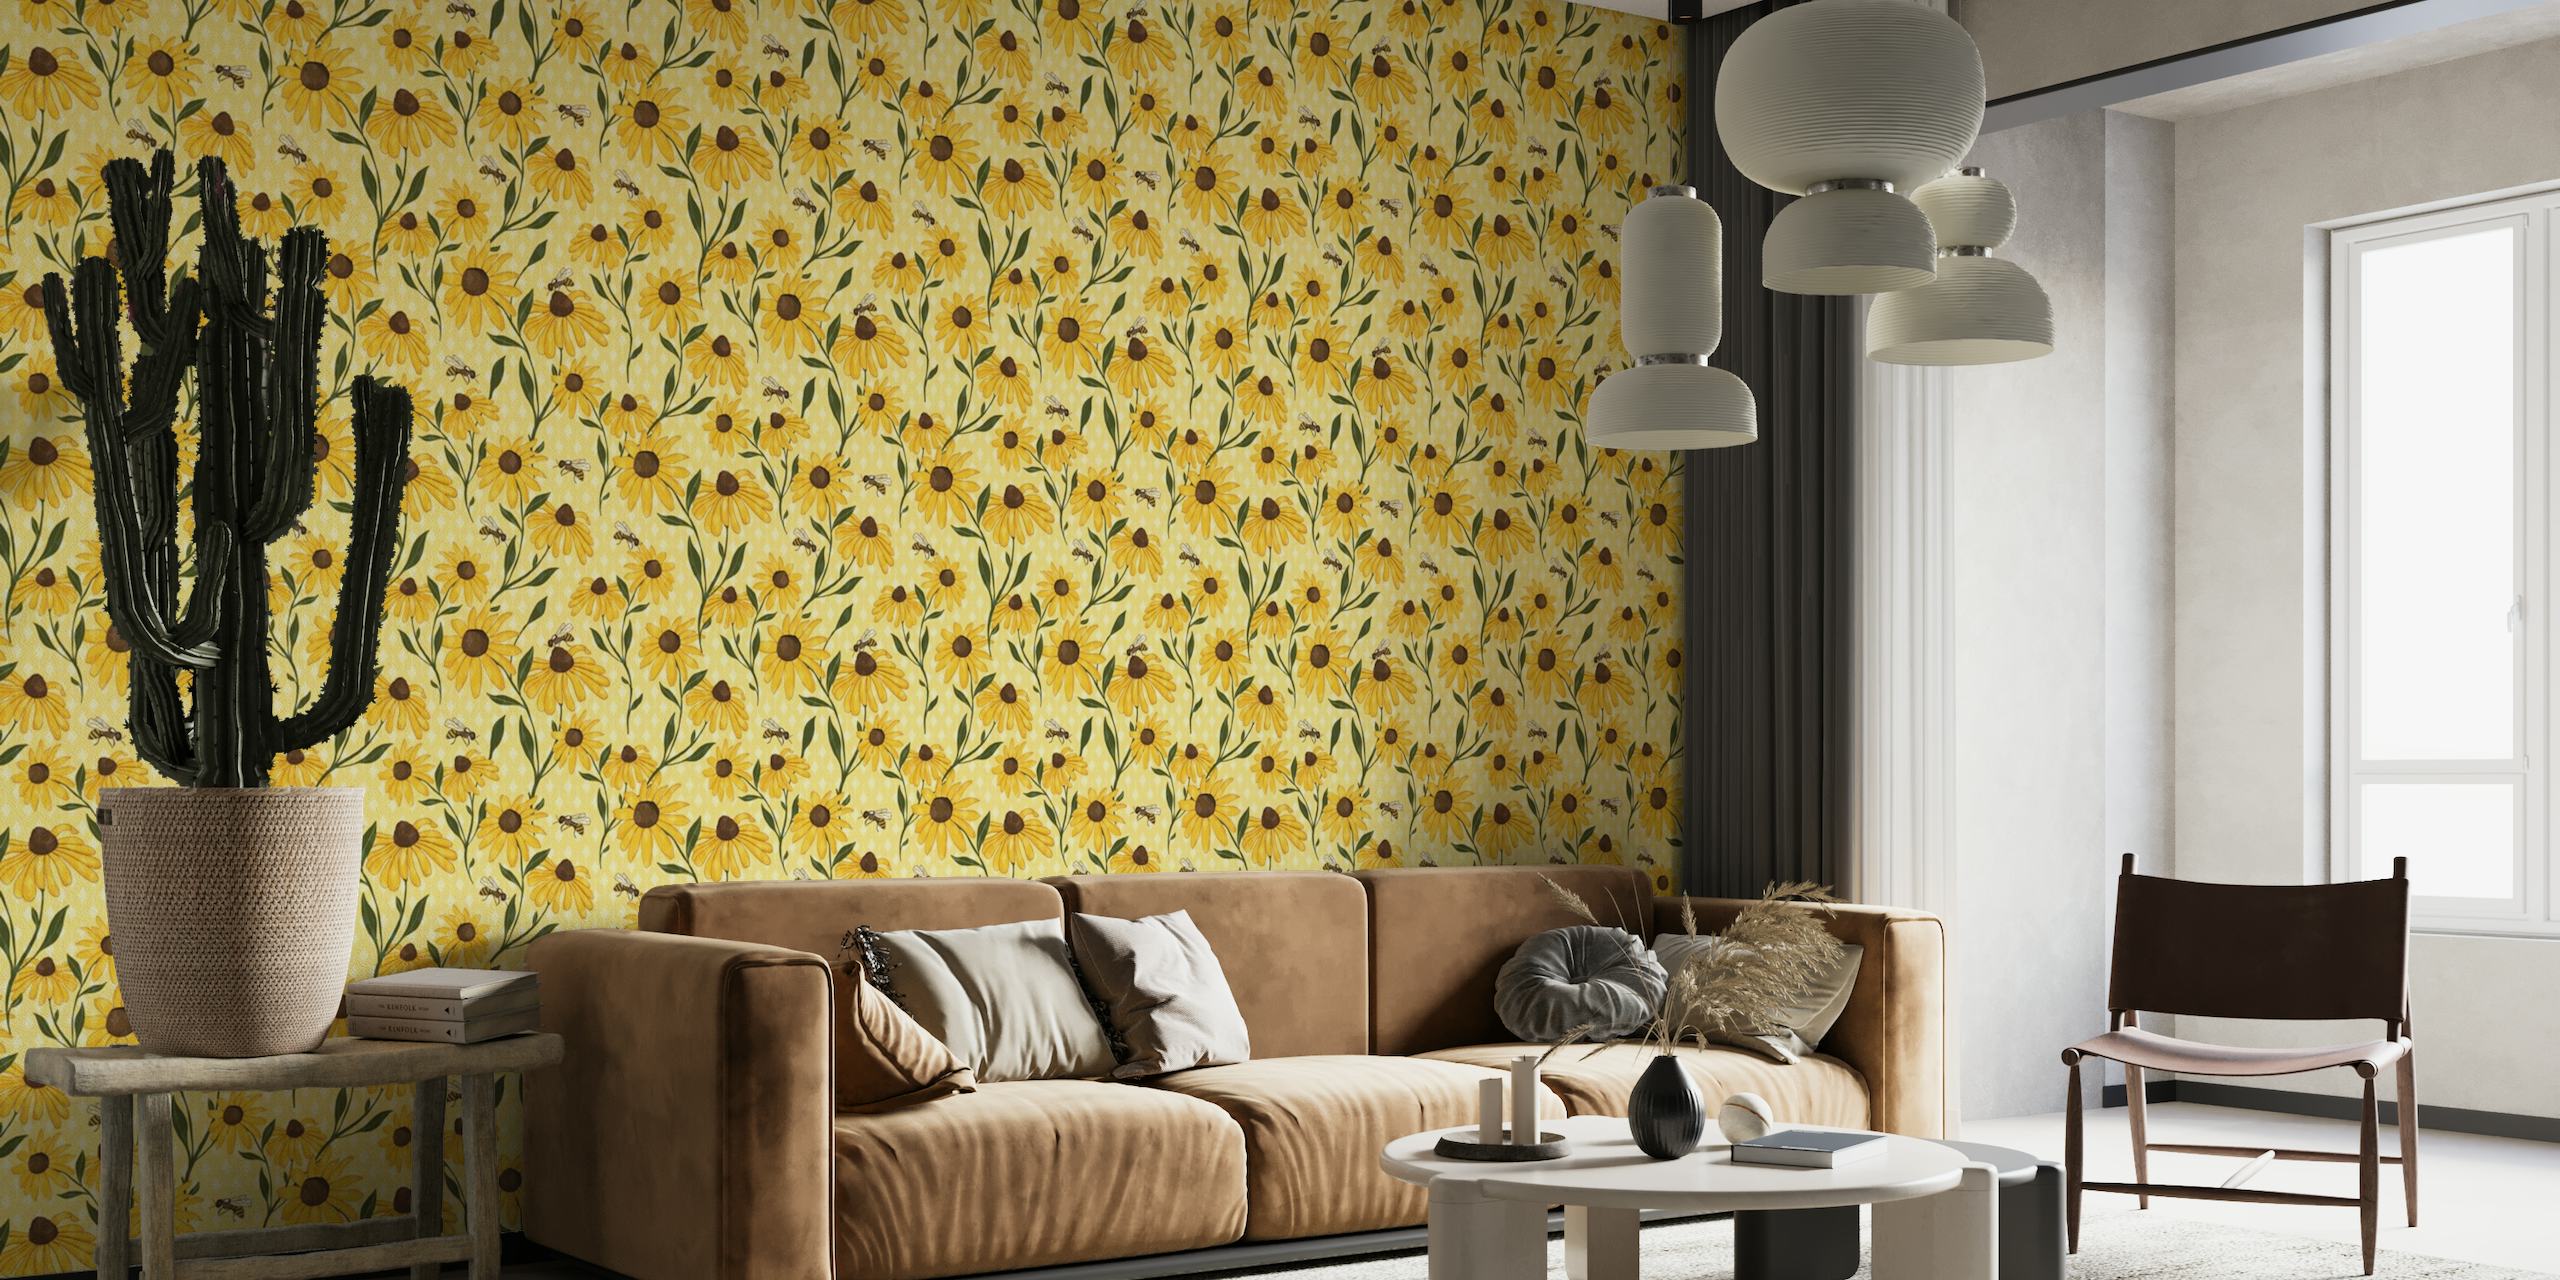 Black Eyed Susan flowers with honey bees wall mural